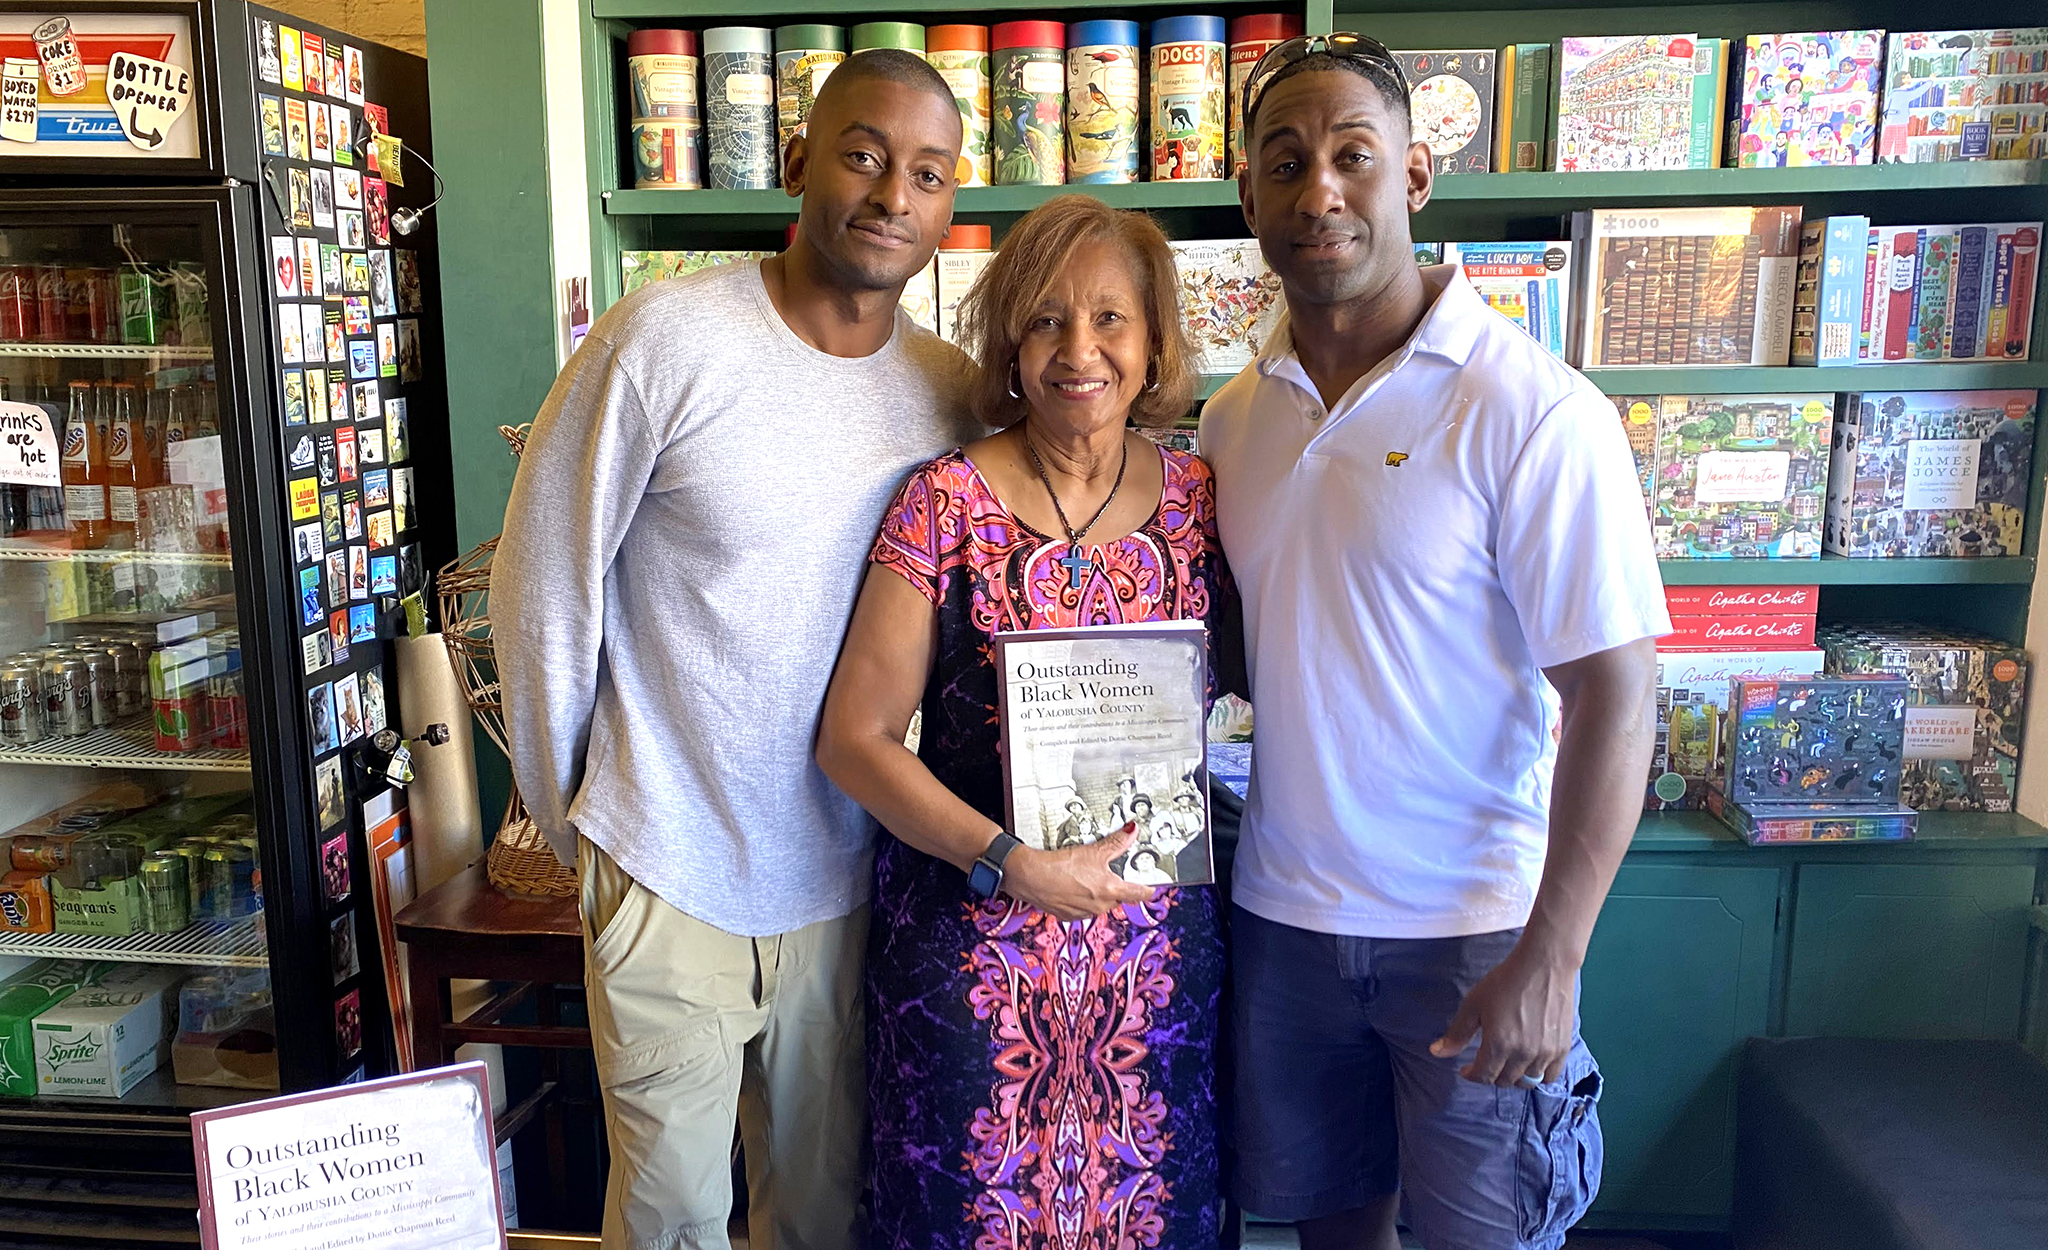 UM alumna Dottie Chapman Reed (center) is accompanied by her sons at a book-signing event for ‘Outstanding Black Women of Yalobusha County’ at Off Square Books in Oxford. The 2020 book grew from her oral preservation efforts and work with the university’s Center for the Study of Southern Culture. Submitted photo